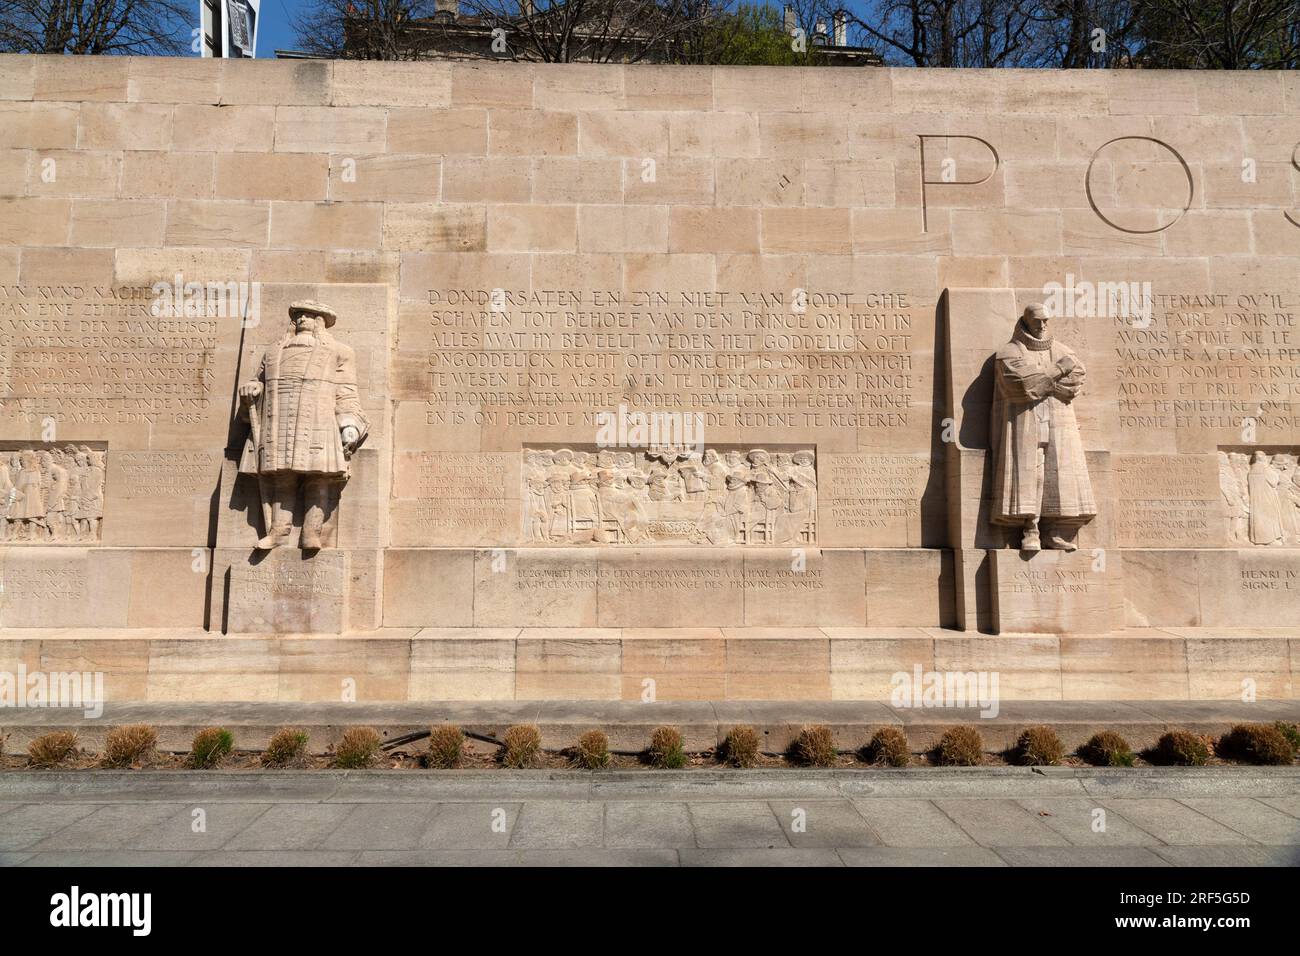 Geneva, Switzerland - 25 March 2022: The International Monument to the Reformation, usually known as the Reformation Wall was inaugurated in 1909 in G Stock Photo